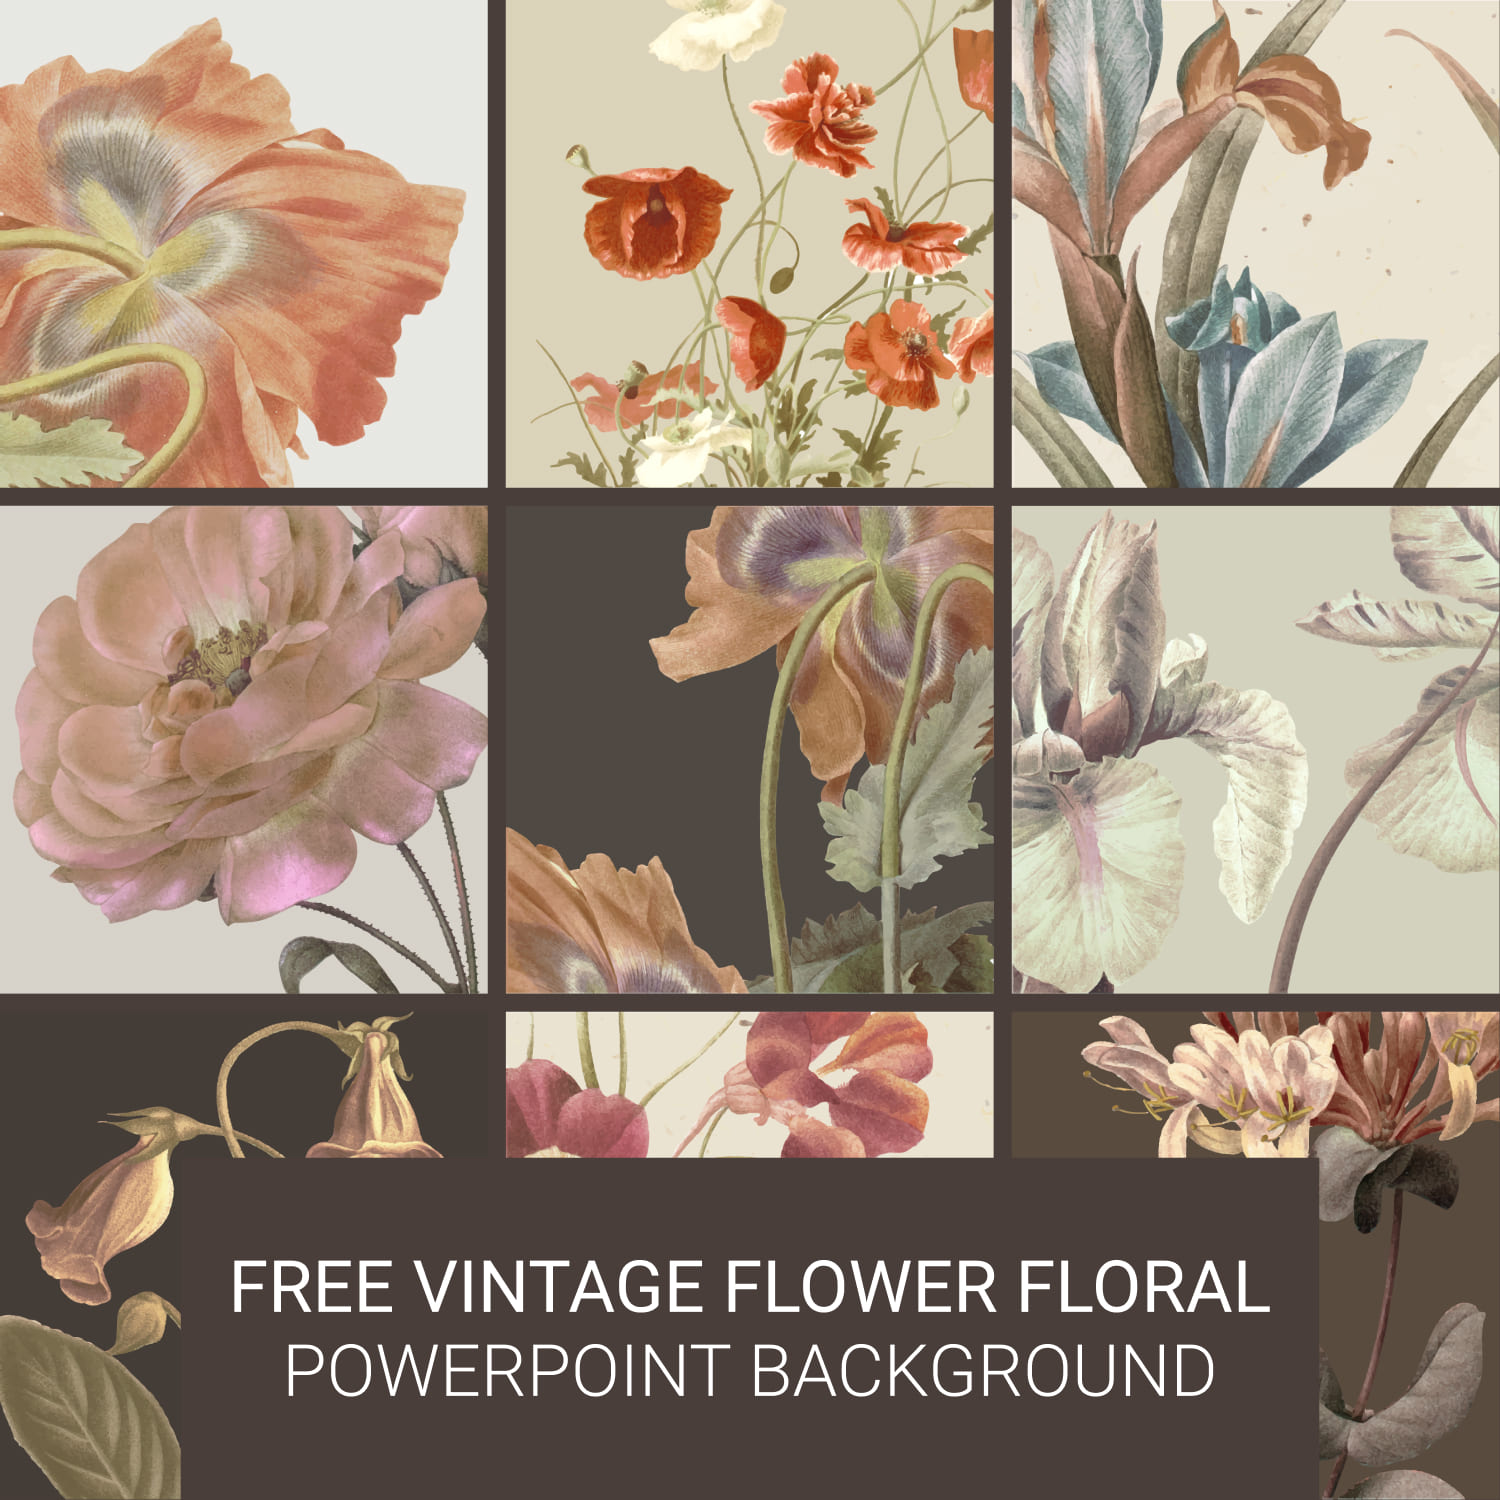 Preview Free Vintage Flower Floral Powerpoint Background 1500x1500 2.